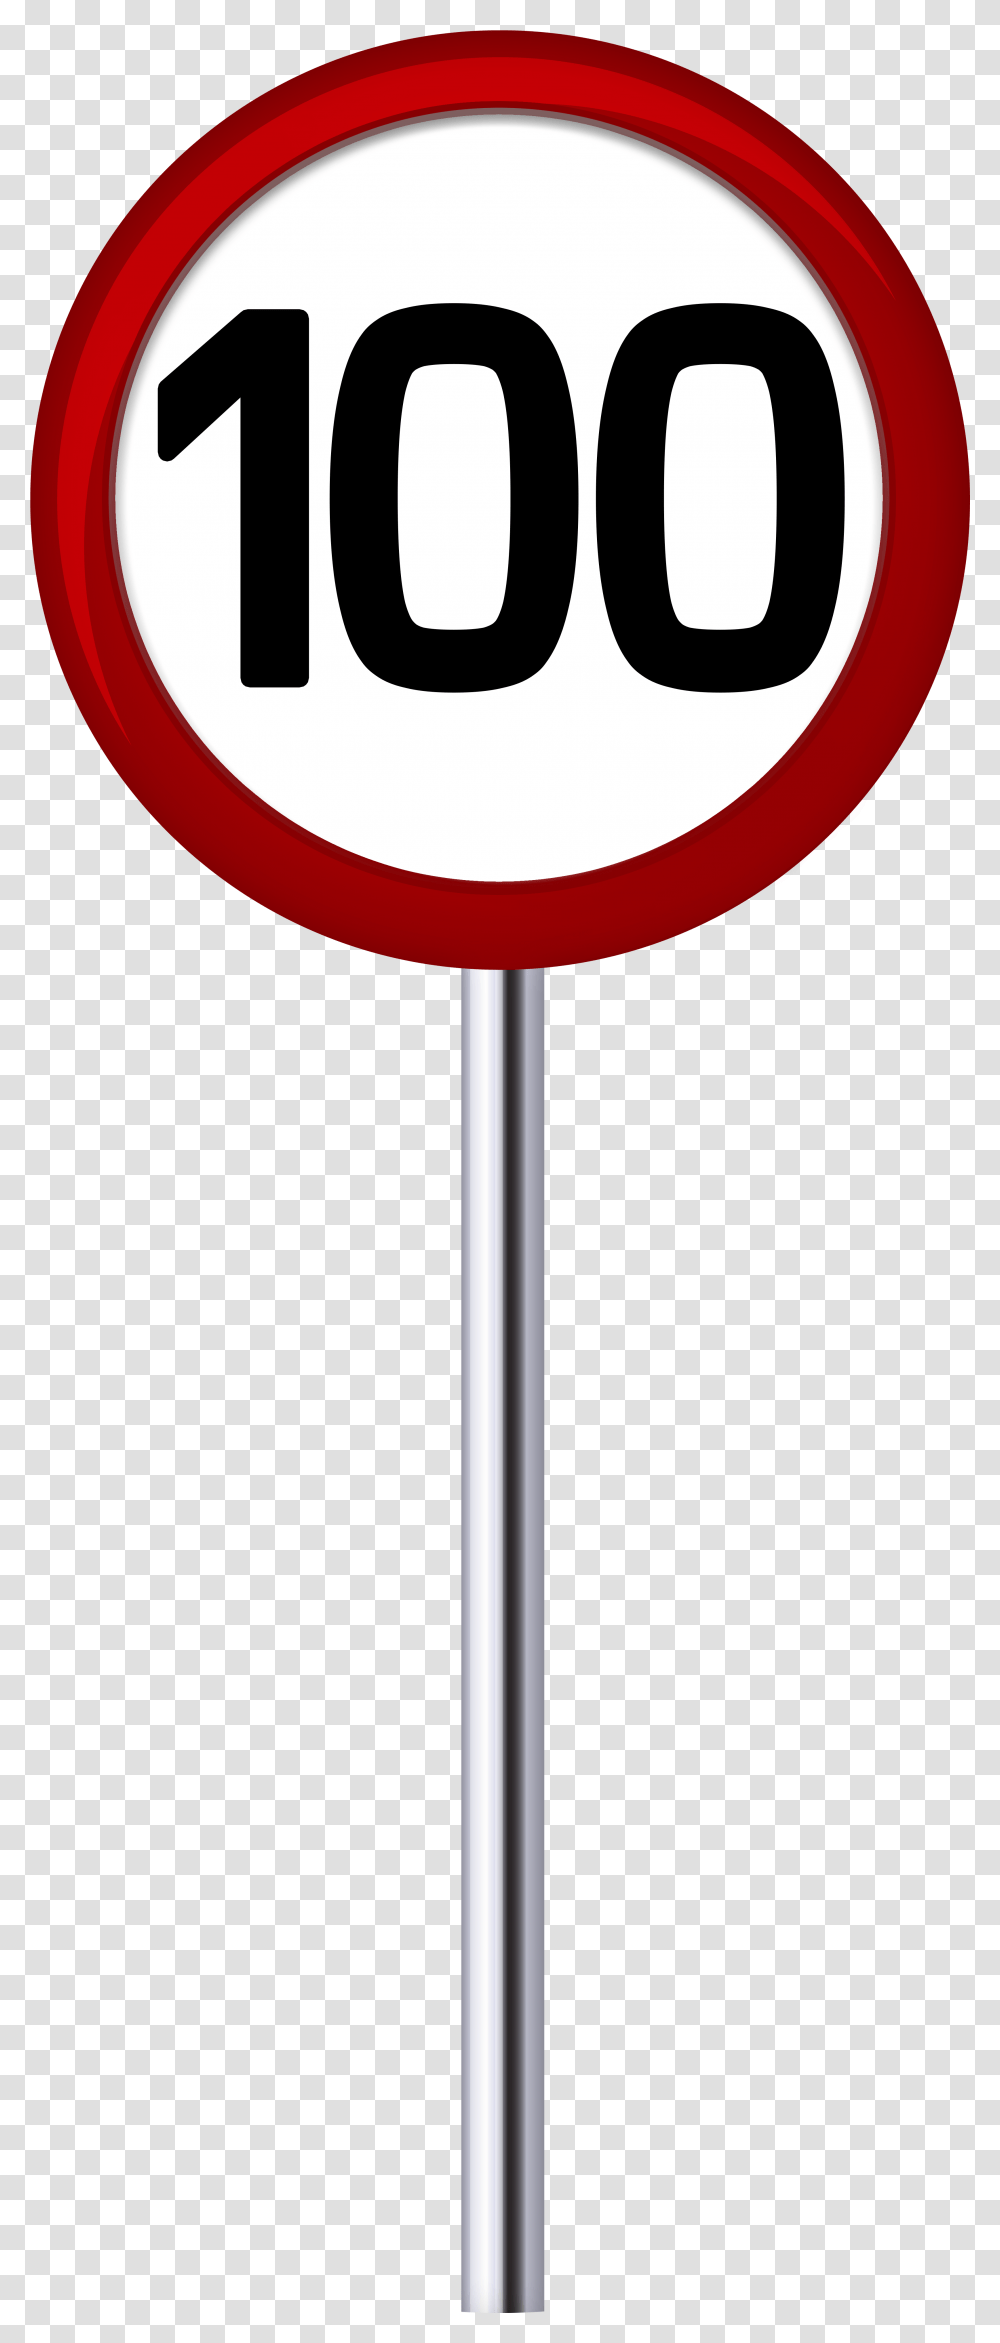 Speed Limit Blank Sign Stock Image Traffic Sign, Food, Candy, Lollipop Transparent Png